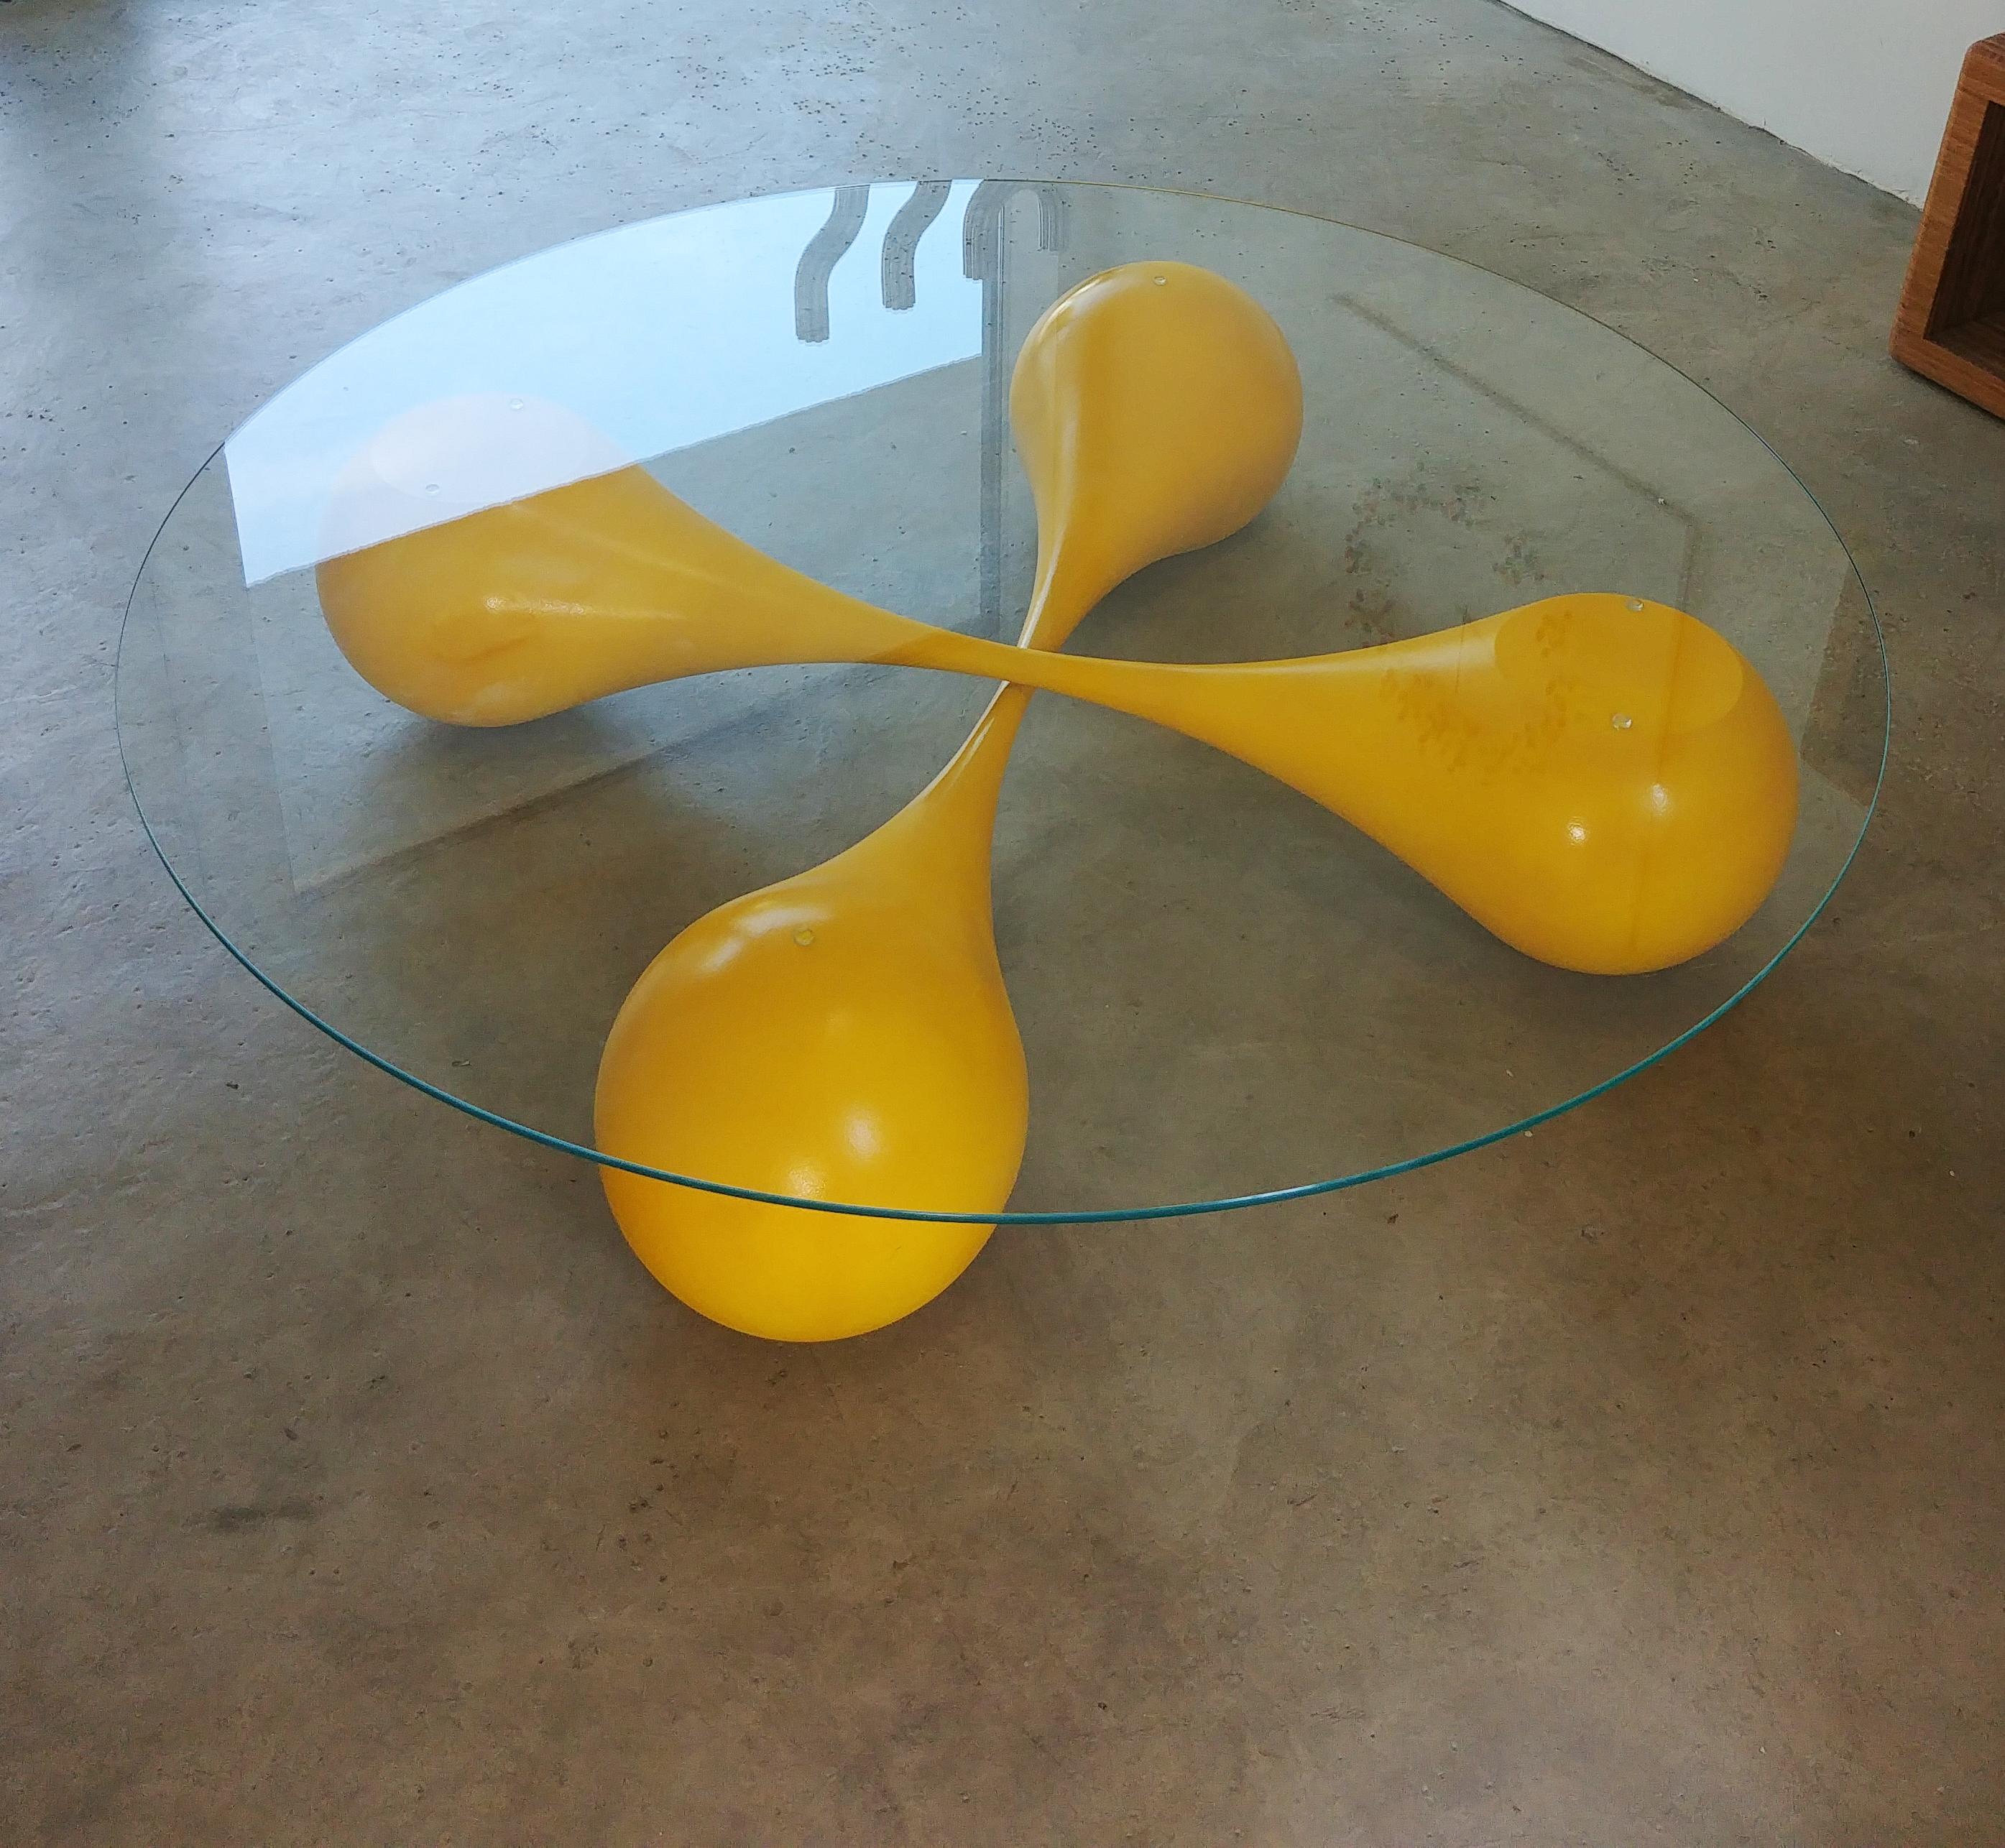 Untouchables” sculptural streamline coffee table (table base only)

“Untouchables” coffee-table is constructed from two identical, sculptural, streamline shaped objects.
The objects are placed in such a way that they don’t intersect, but seem to